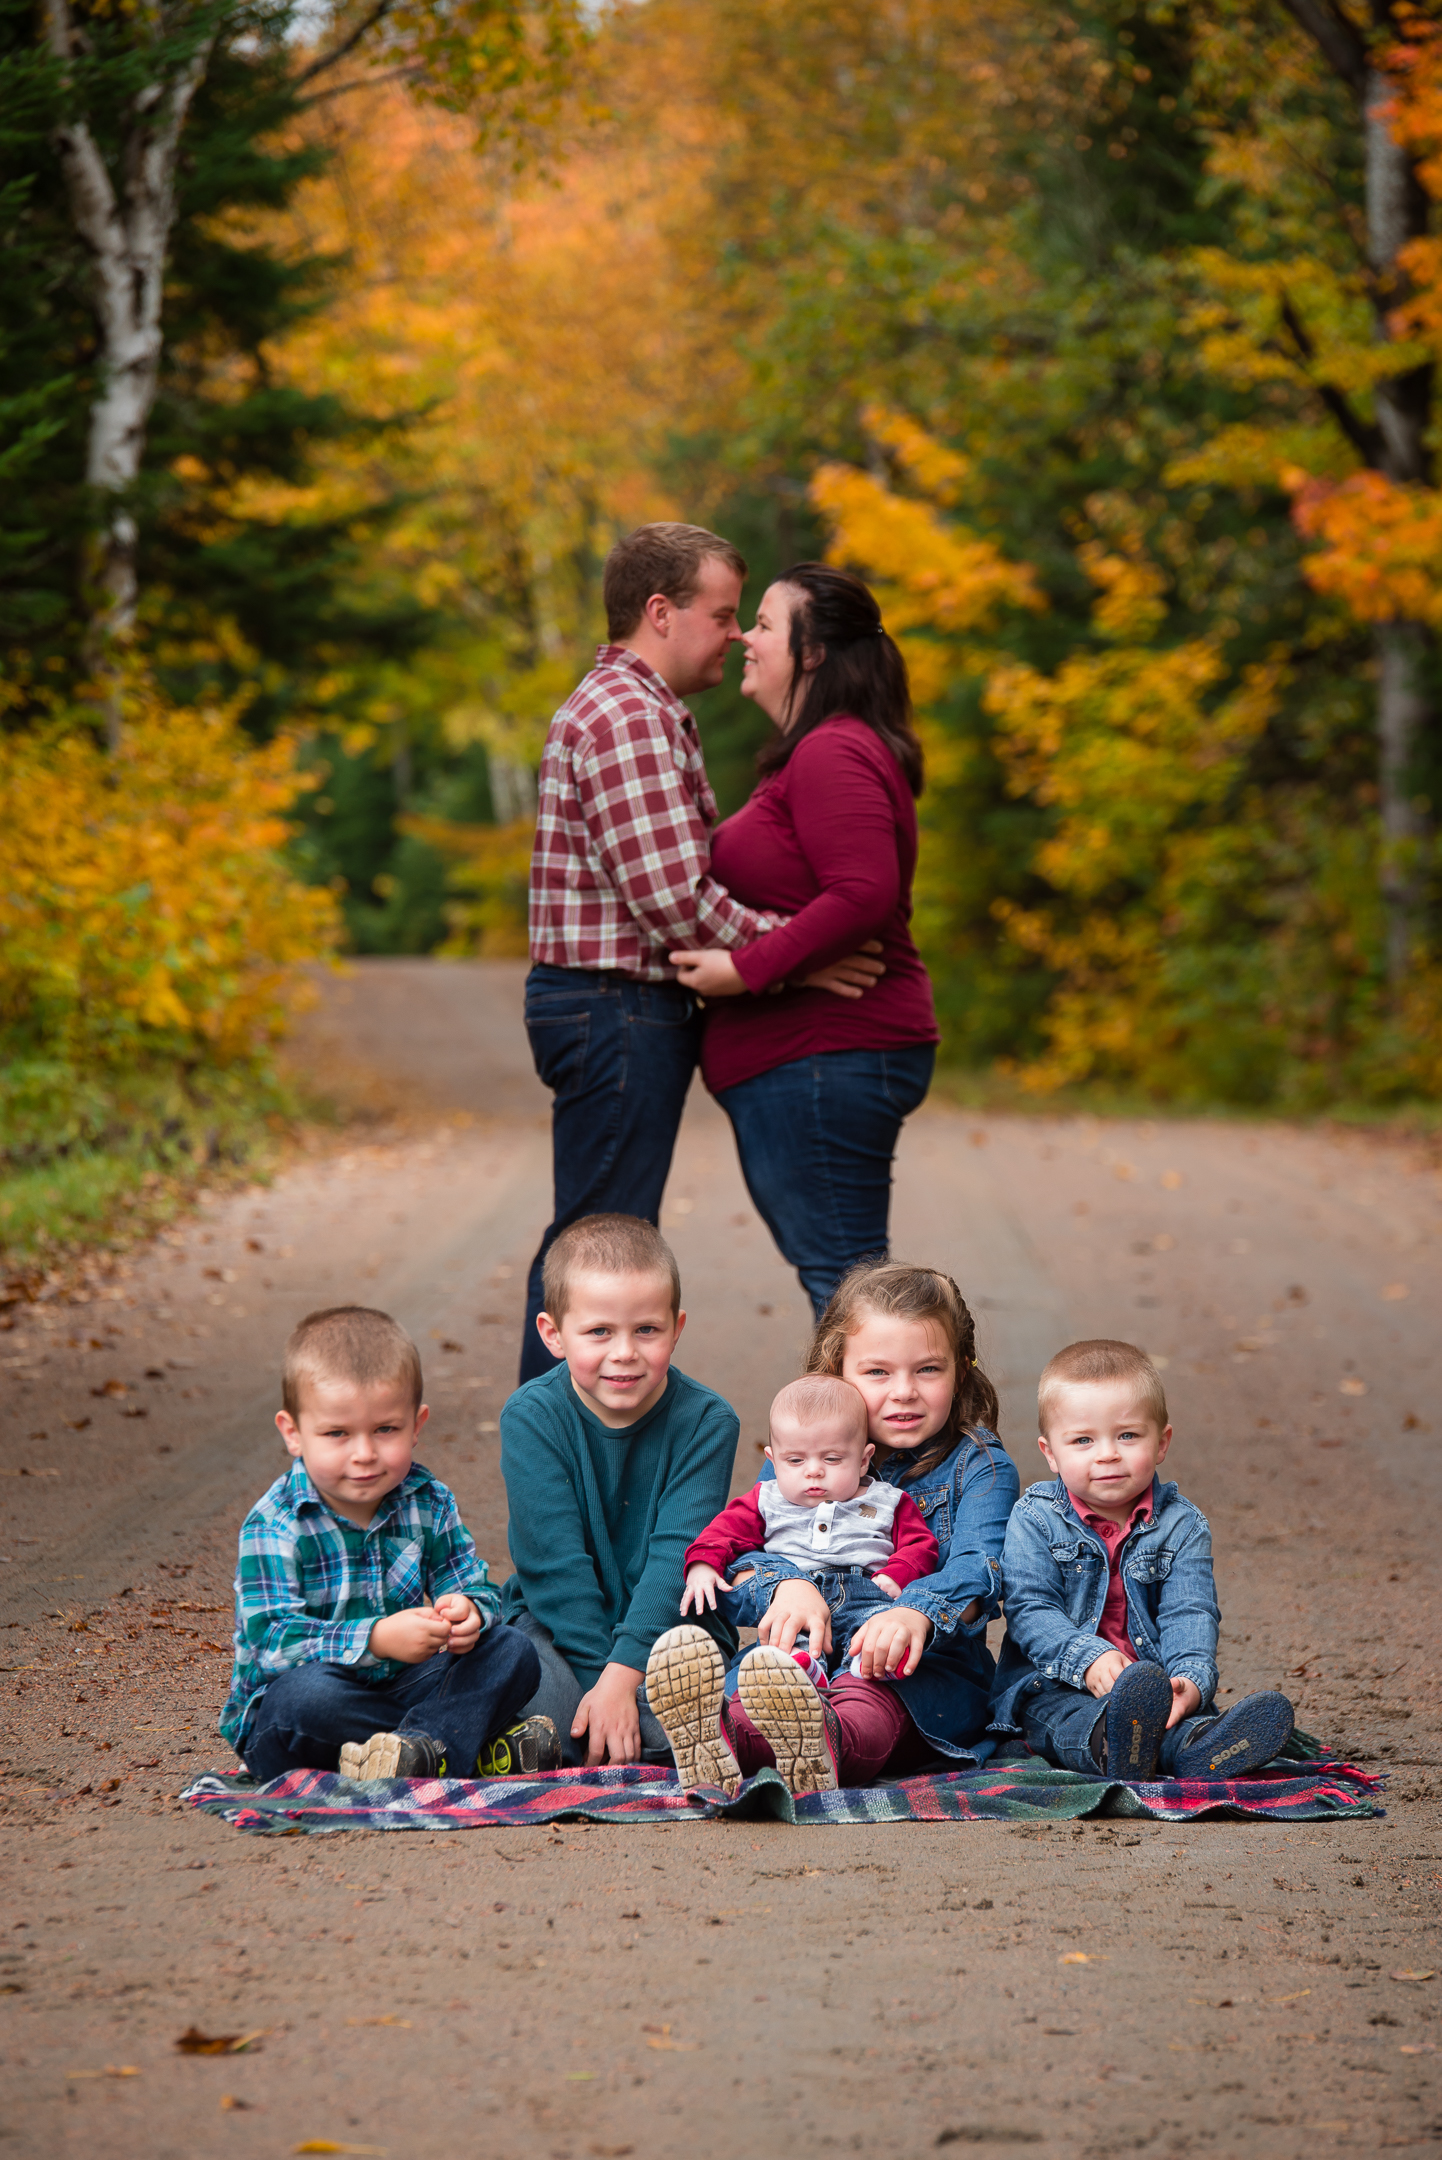 Naomi Lucienne Photography - Extended Family - 171009252.jpg